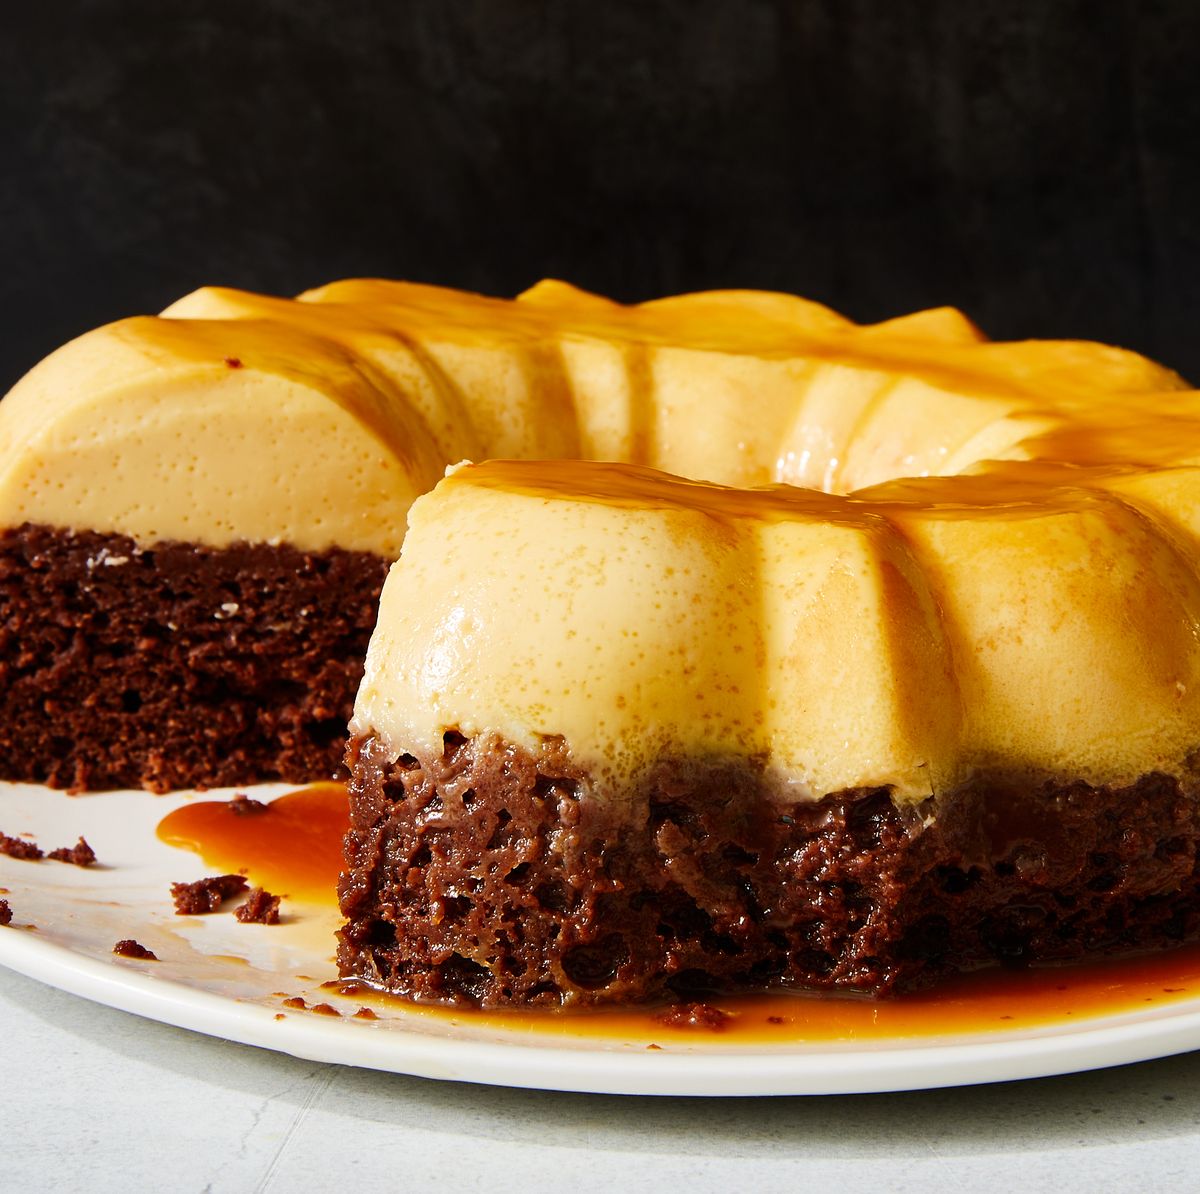 ChocoFlan (The Impossible Layered Cake)